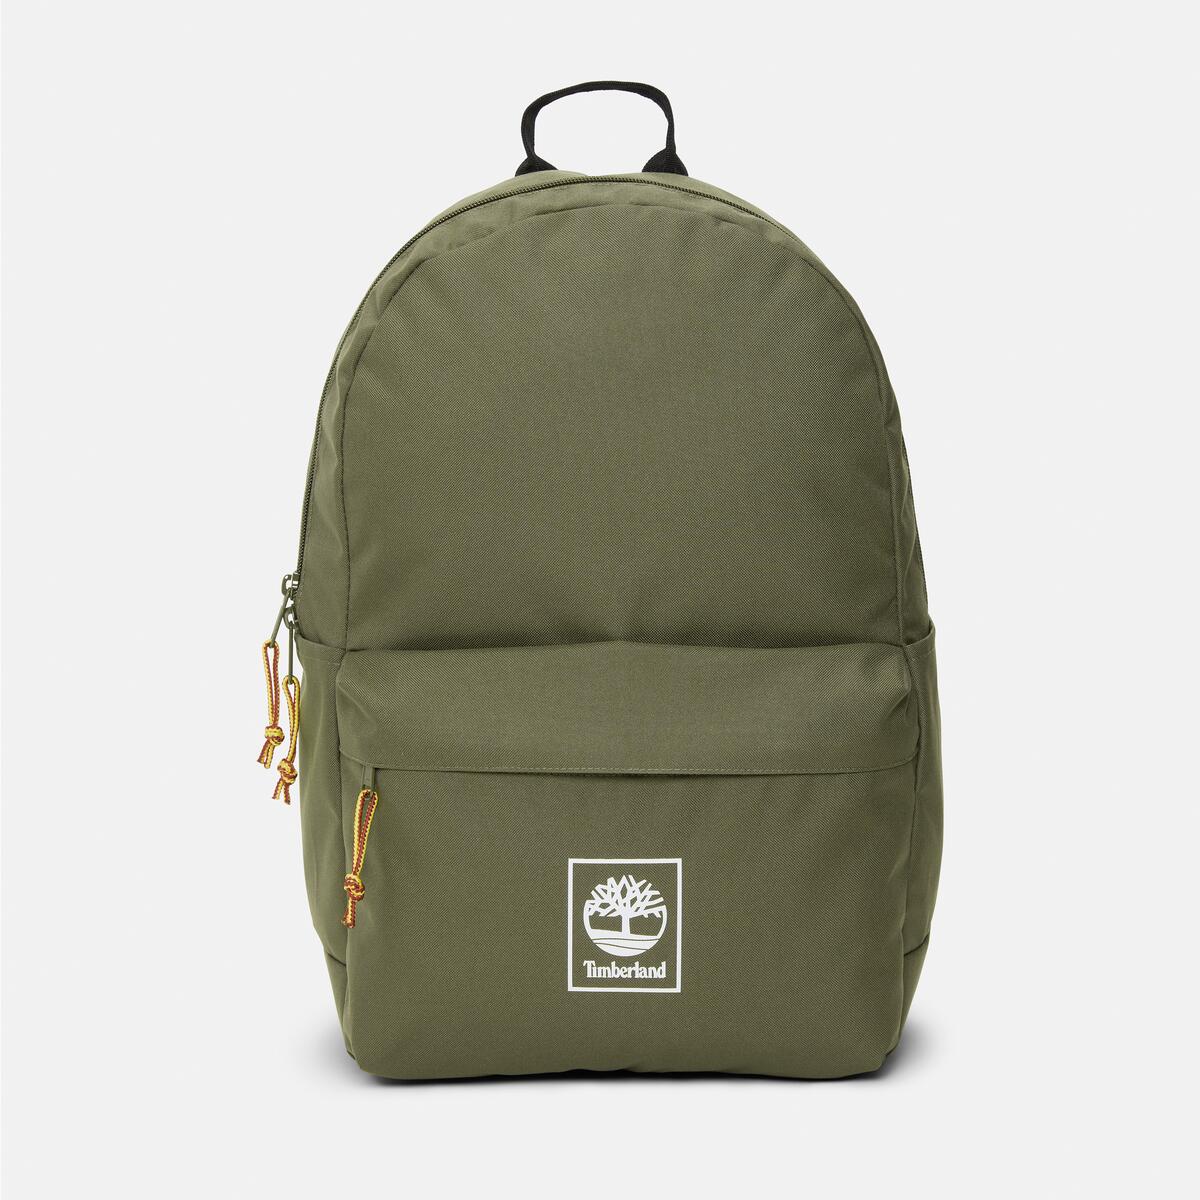 All Gender Thayer Backpack - Timberland - Singapore